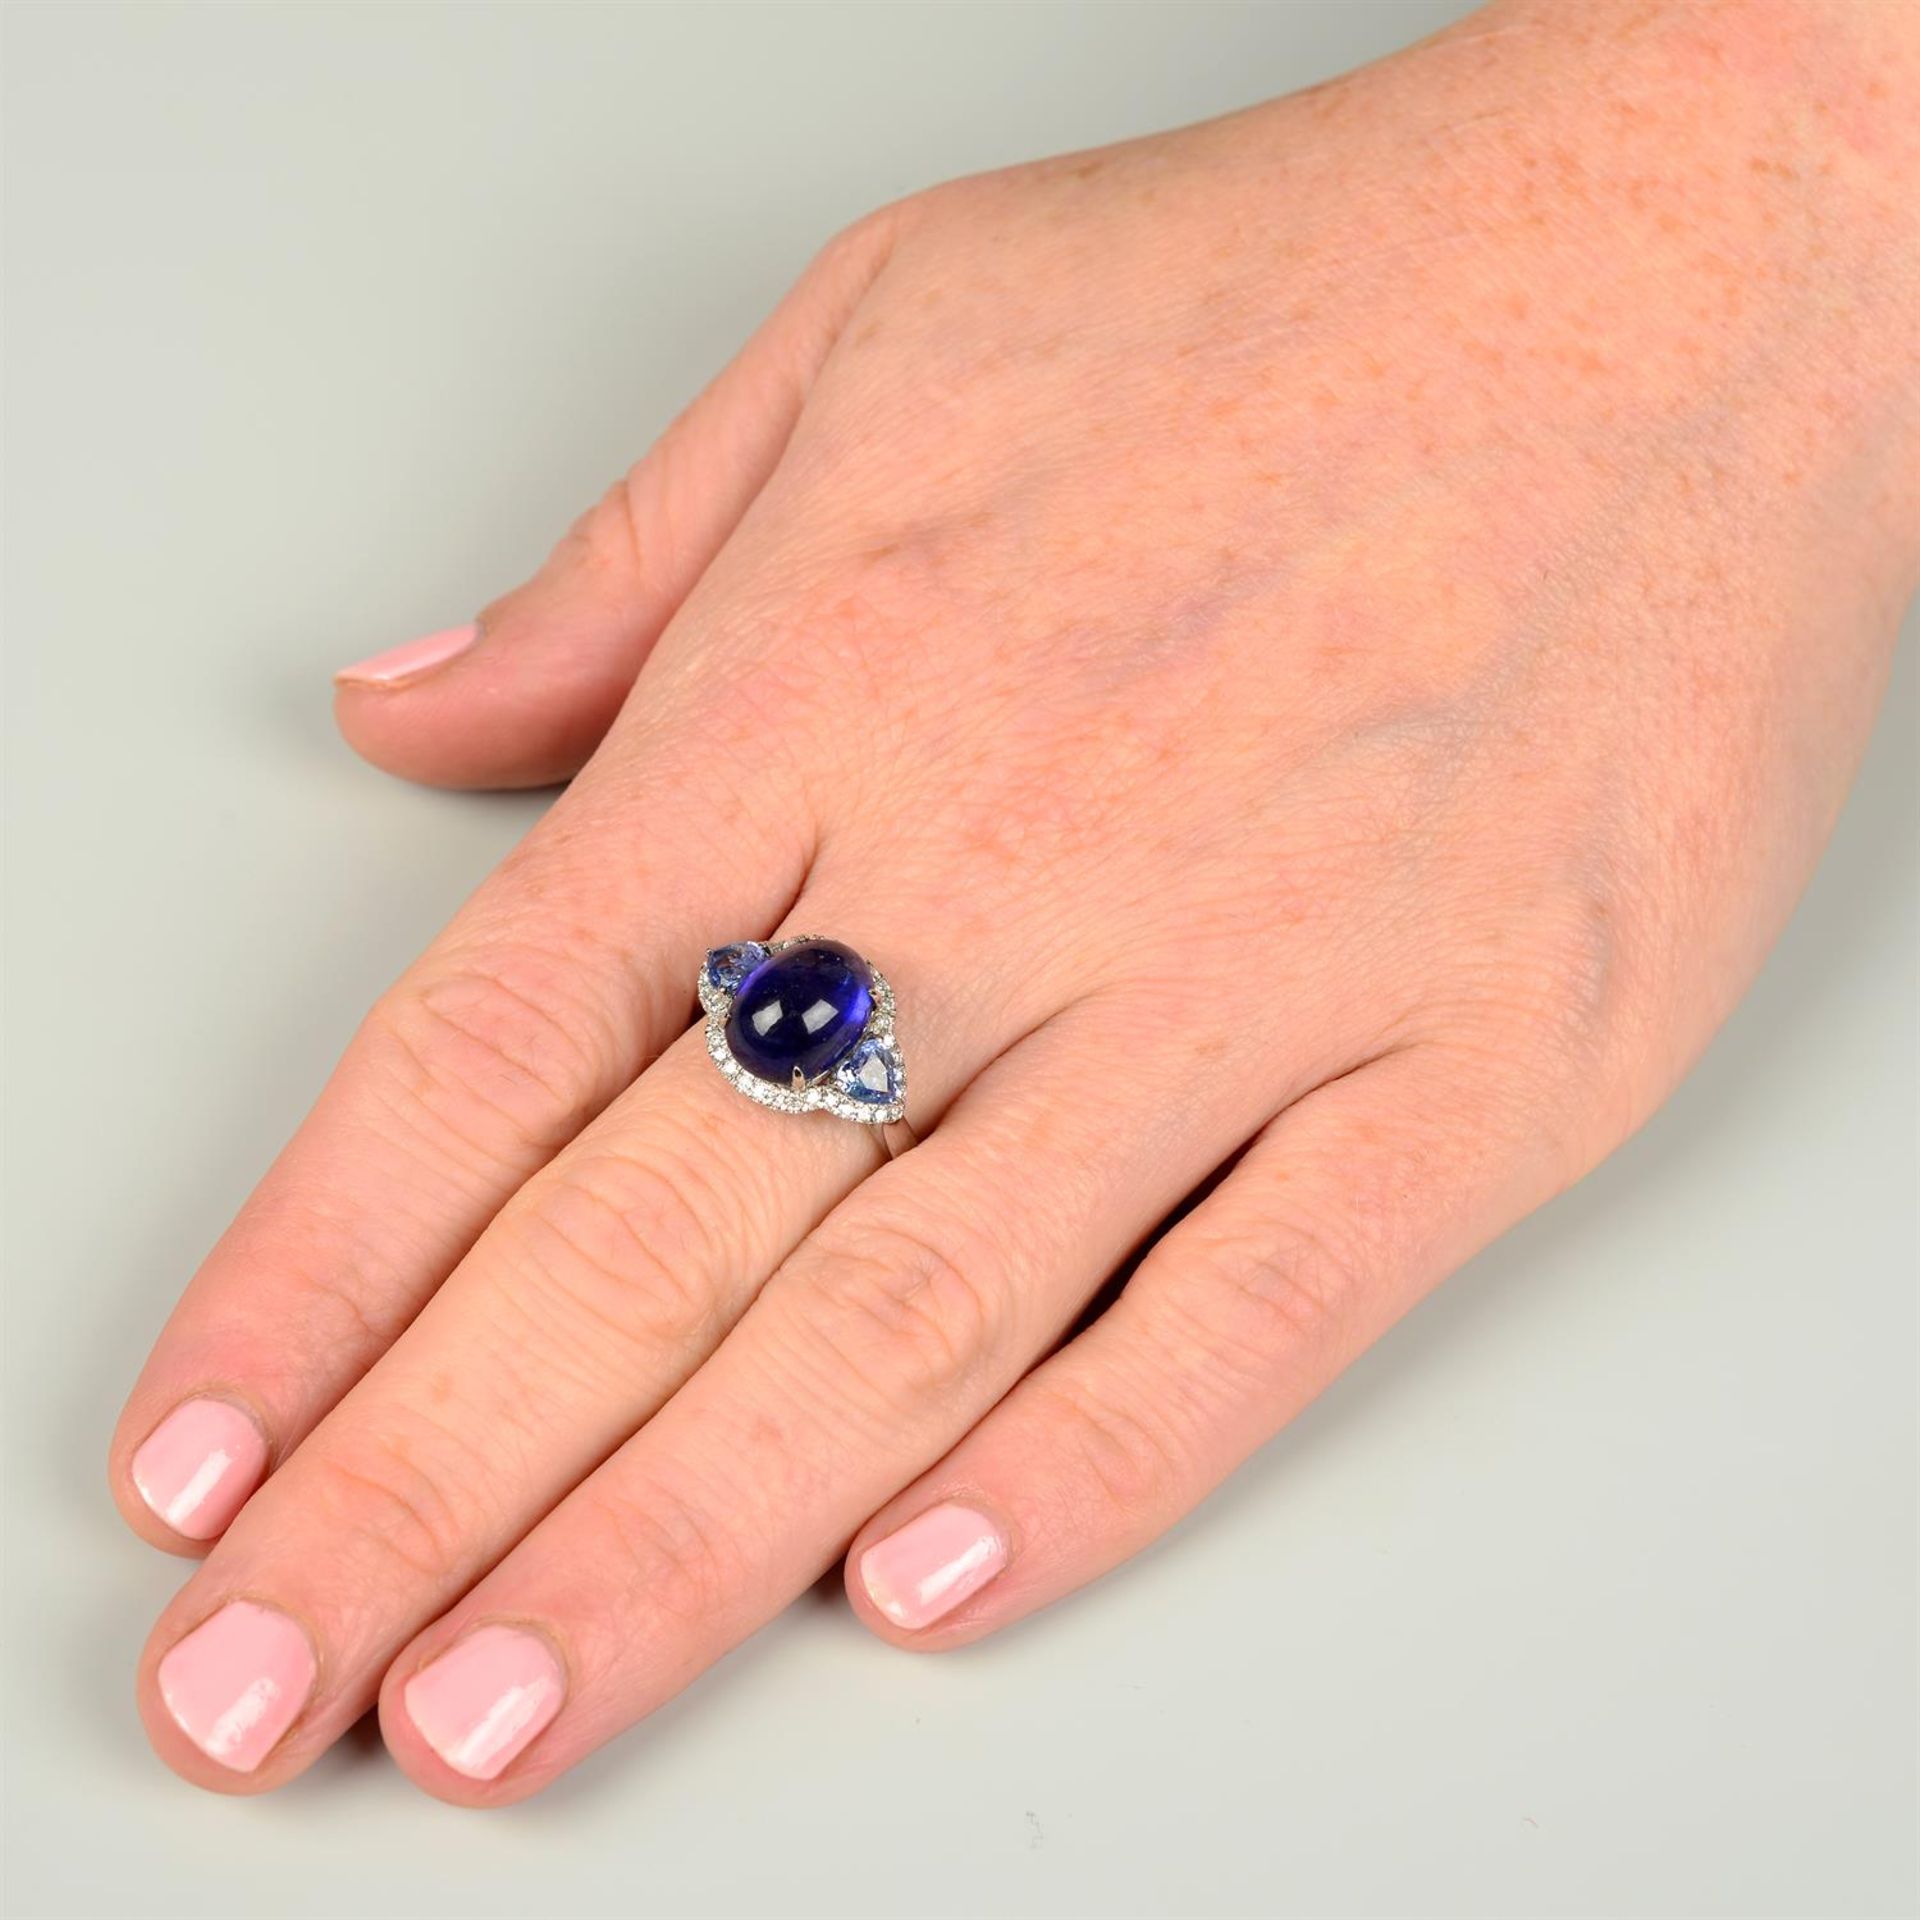 A glass-filled sapphire cabochon, heart-shape sapphire and brilliant-cut diamond dress ring. - Image 5 of 5